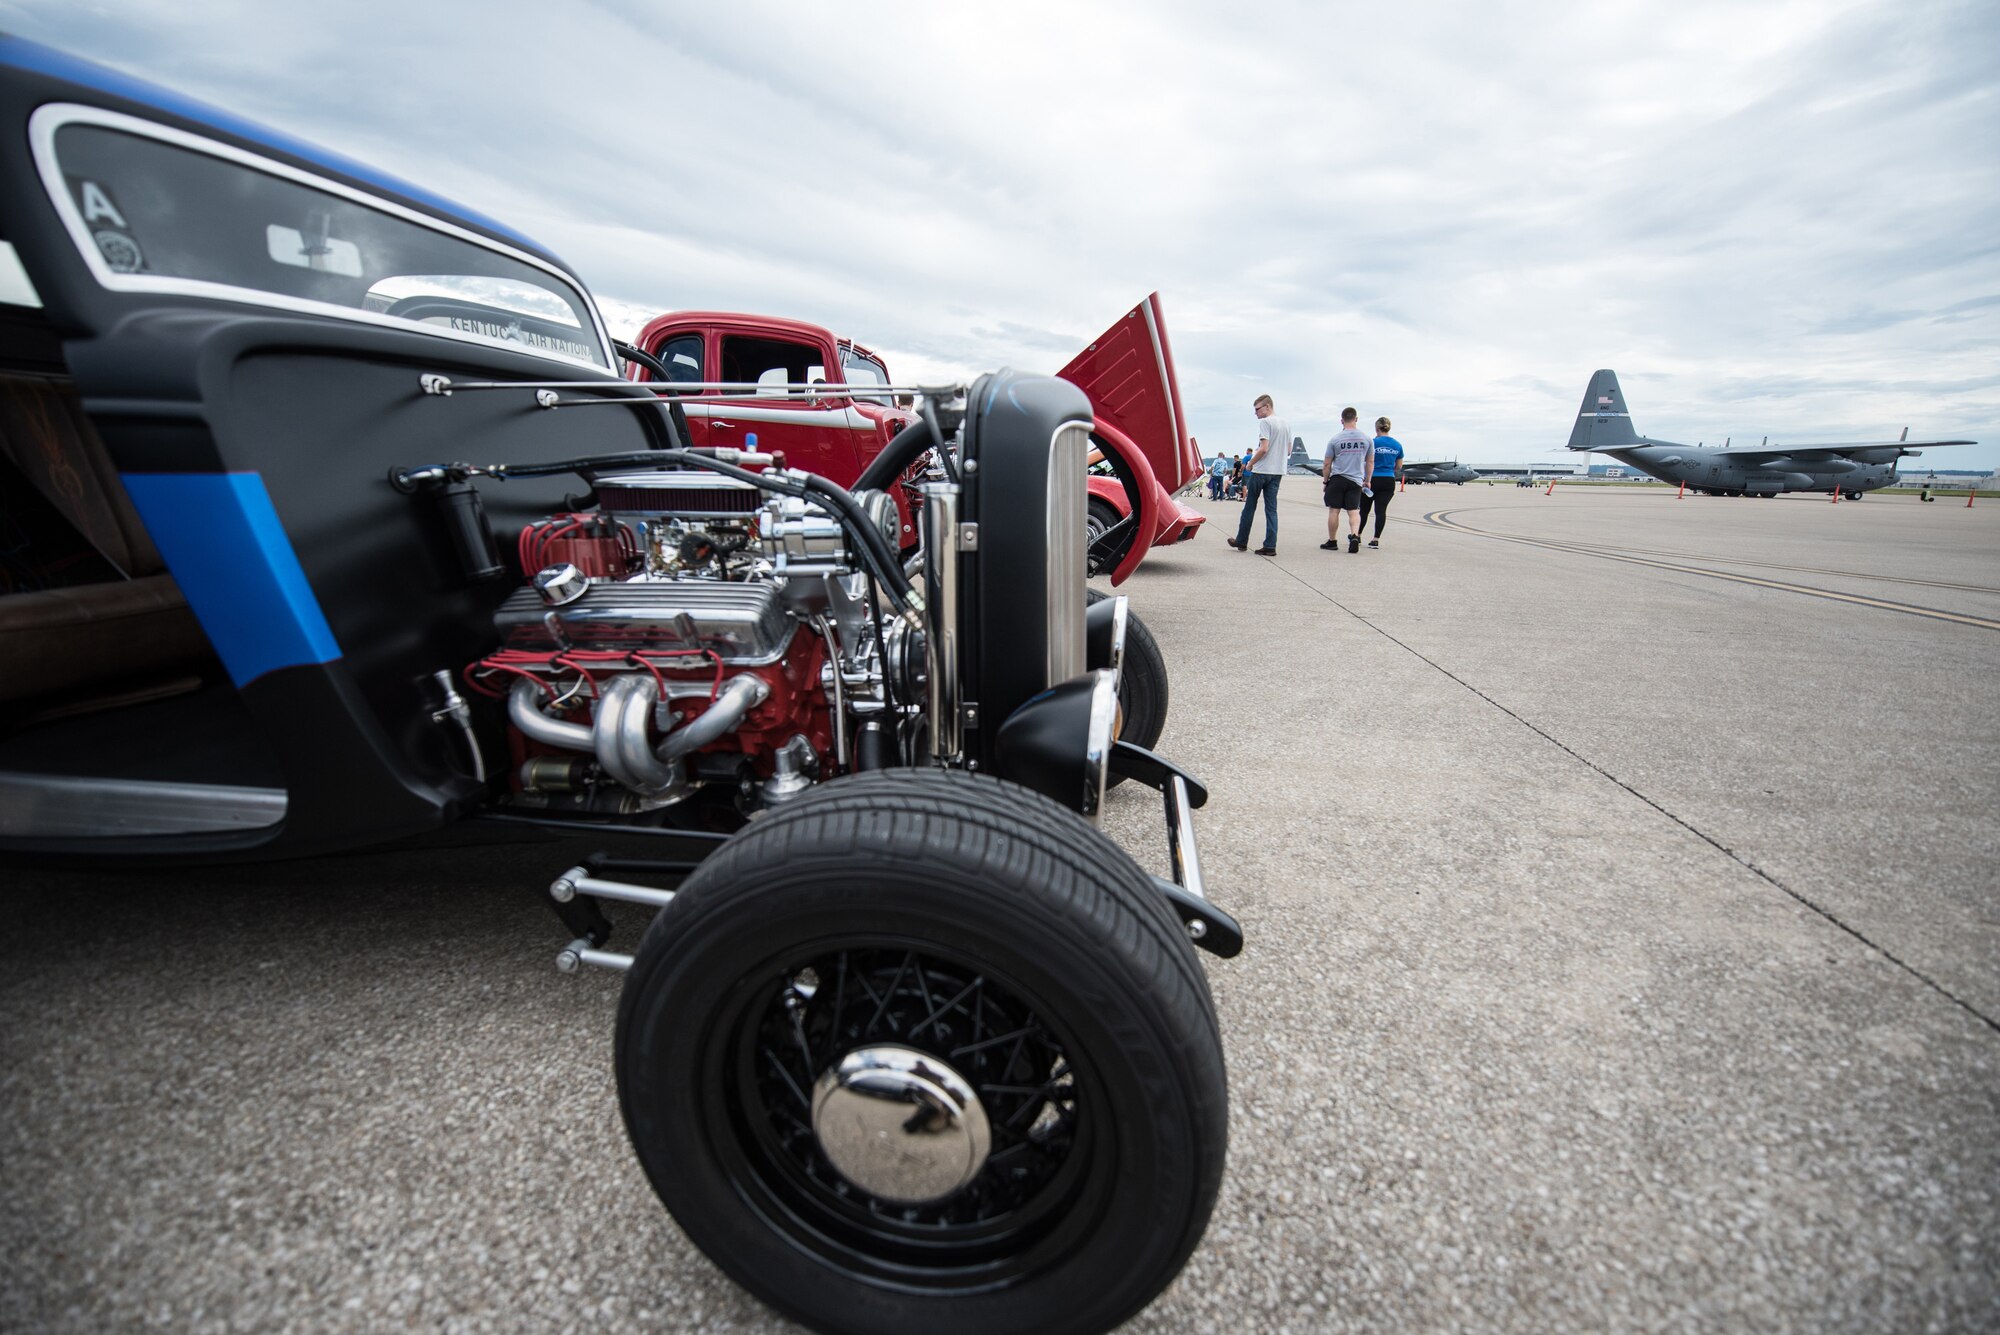 Vintage cars sit on the 123rd Airlift Wing flight line during Family Day at the Kentucky Air National Guard Base in Louisville, Ky., on Sept. 16, 2018. The event, which was sponsored by the Airman and Family Readiness Office and the Key Volunteer Group, also featured a static-display C-130 Hercules aircraft and several other activities. (U.S. Air National Guard photo by Master Sgt. Phil Speck)